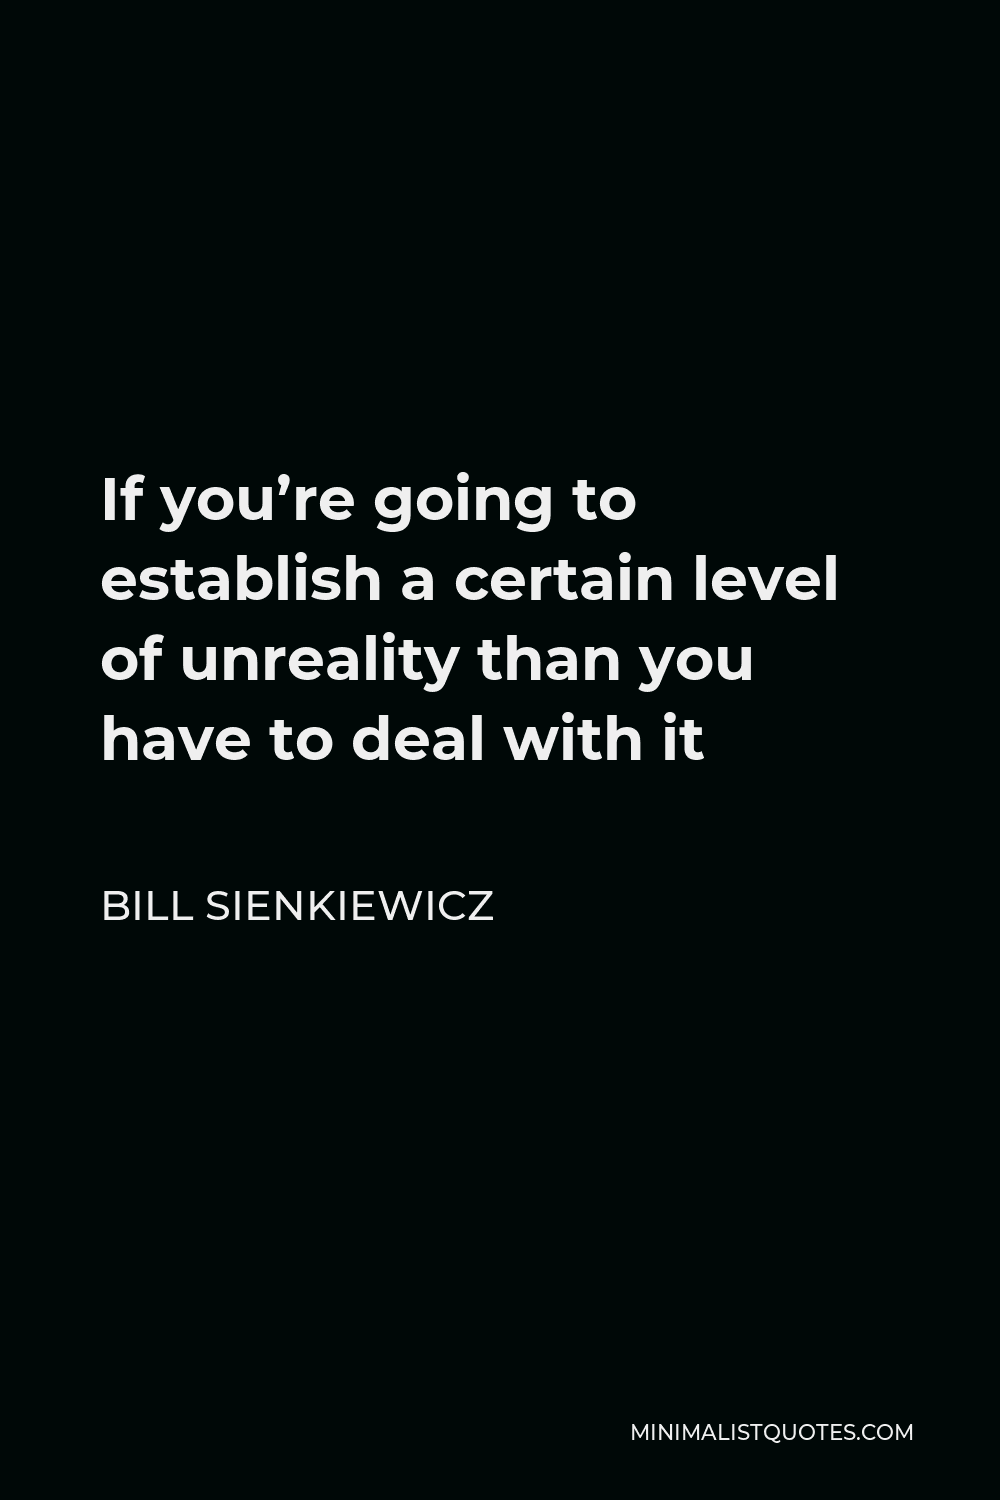 Bill Sienkiewicz Quote - If you’re going to establish a certain level of unreality than you have to deal with it